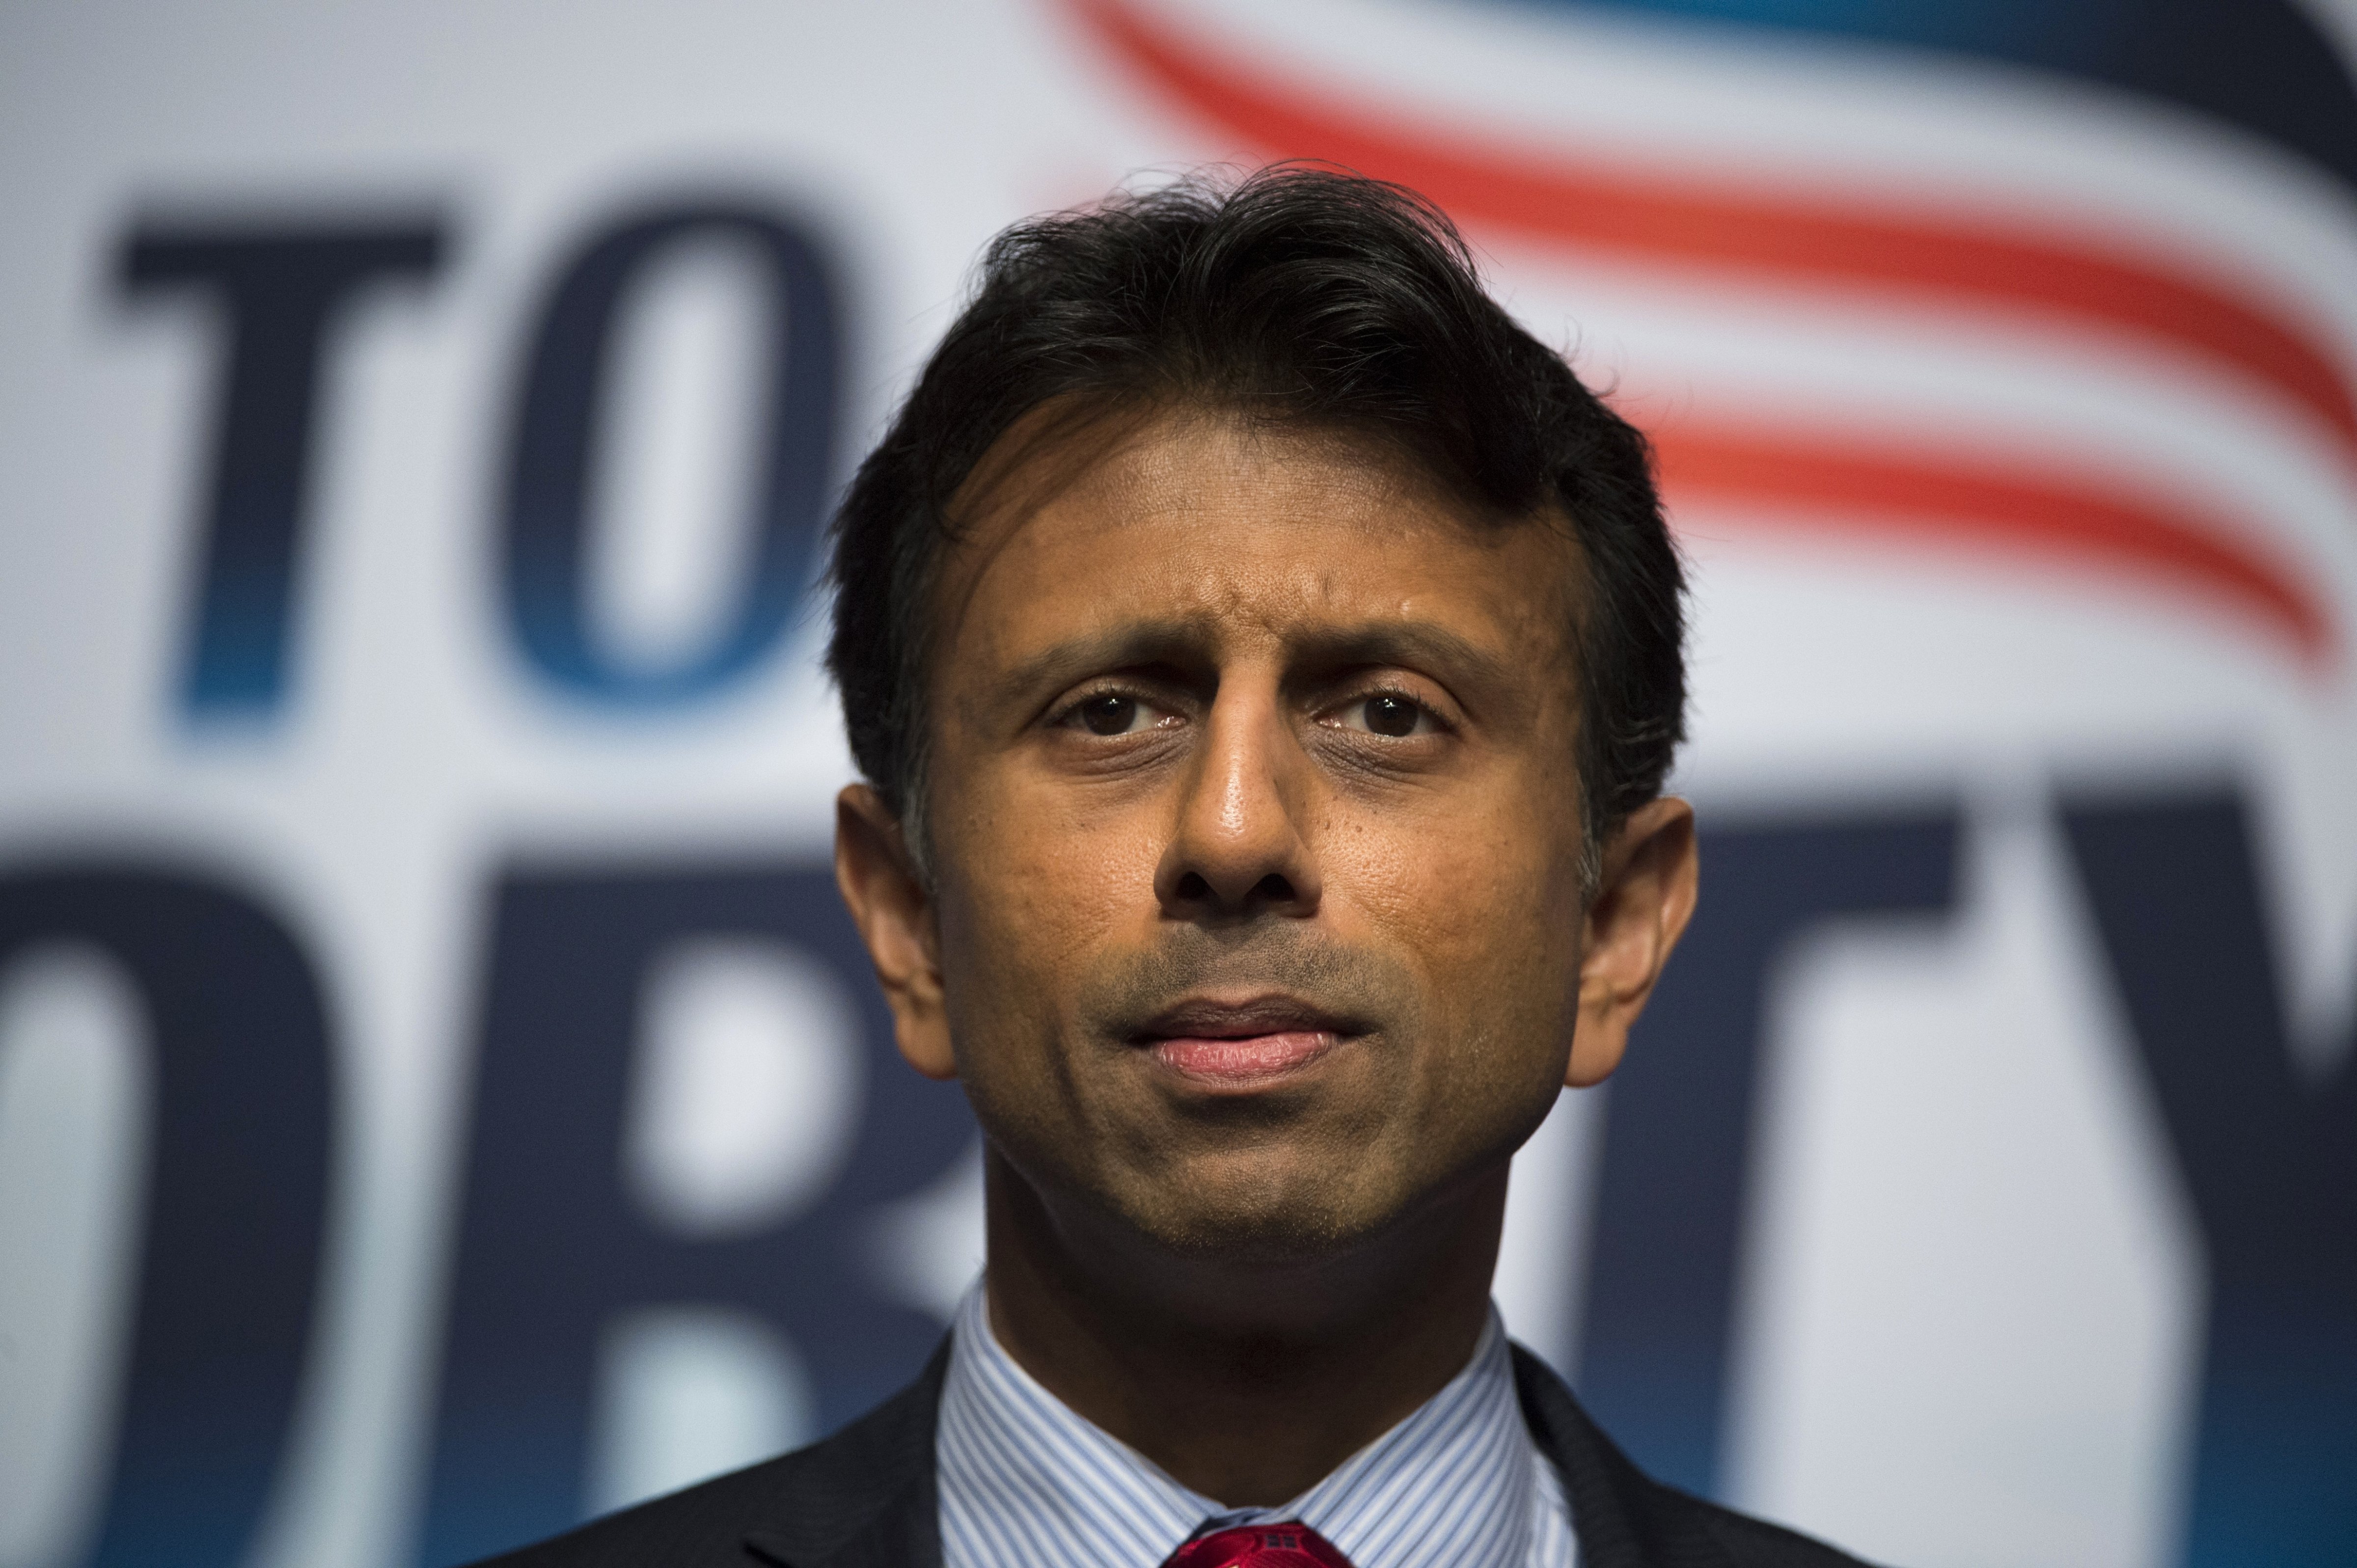 Louisiana Gov. Bobby Jindal delivers the keynote address during Faith and Freedom Coalition's Road to Majority event in Washington on June 21, 2014. (Molly Riley—AP)